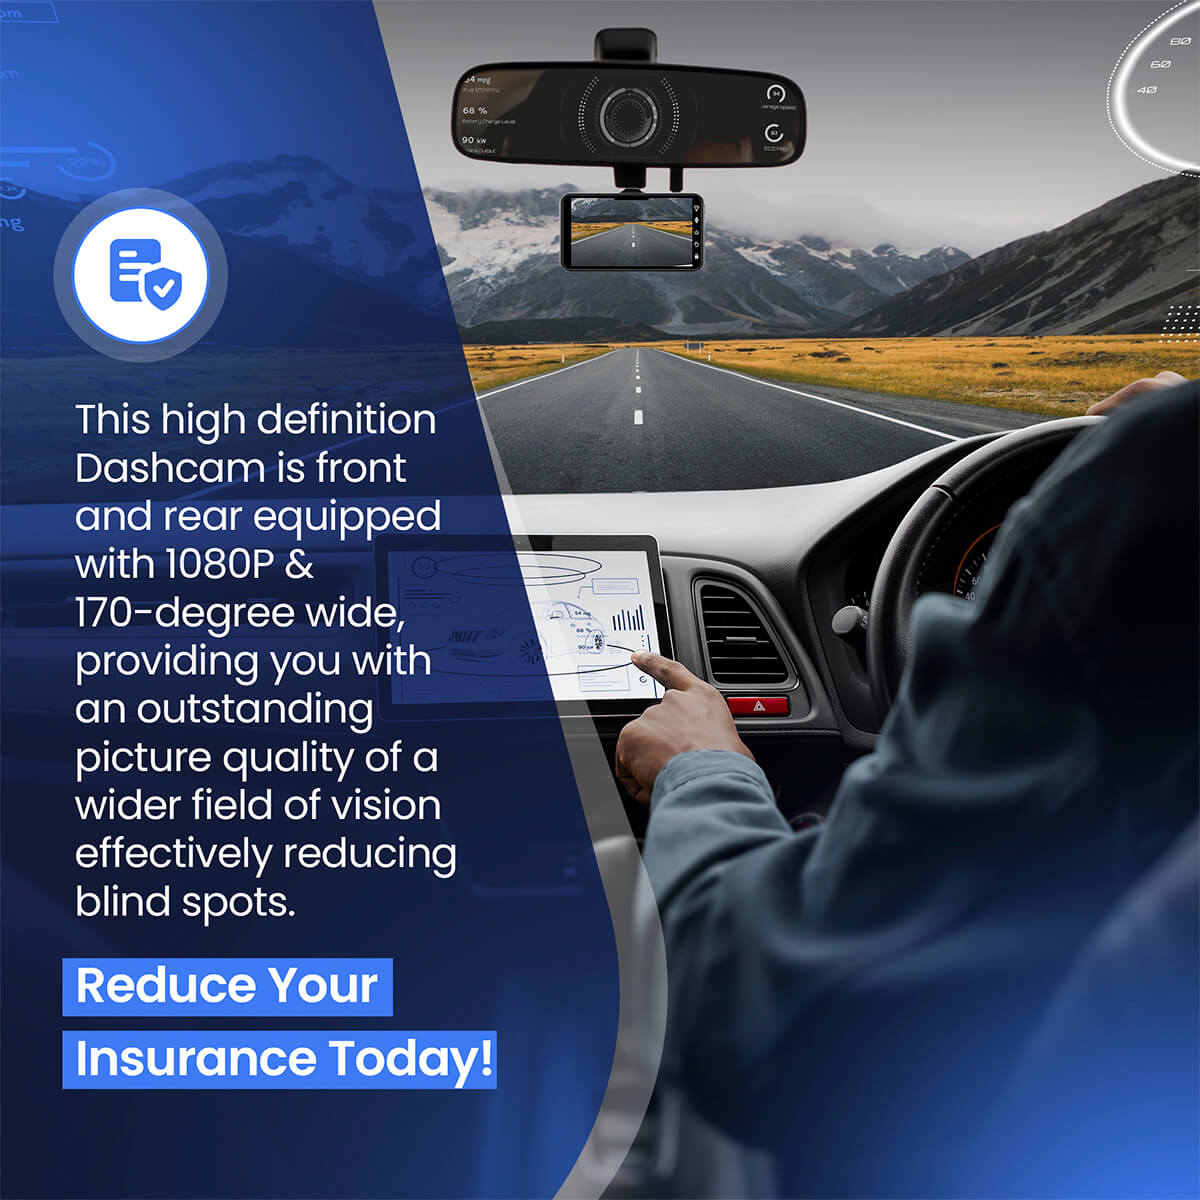 Lower your insurance with Dash Cam Pro compatible with all insurance database